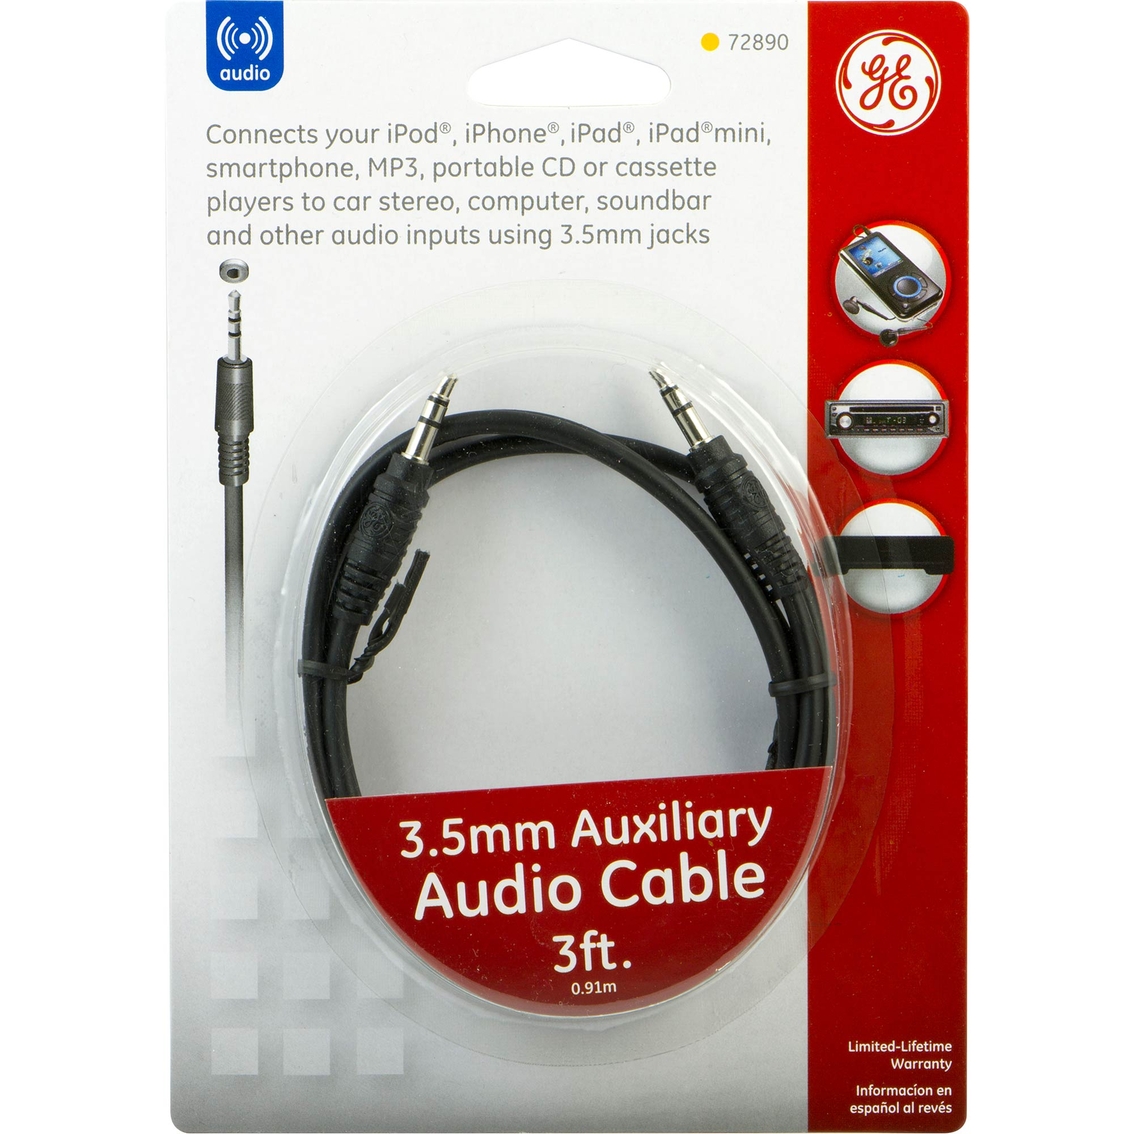 GE 3 Ft. Audio Cable, 3.5mm plugs - Image 2 of 2